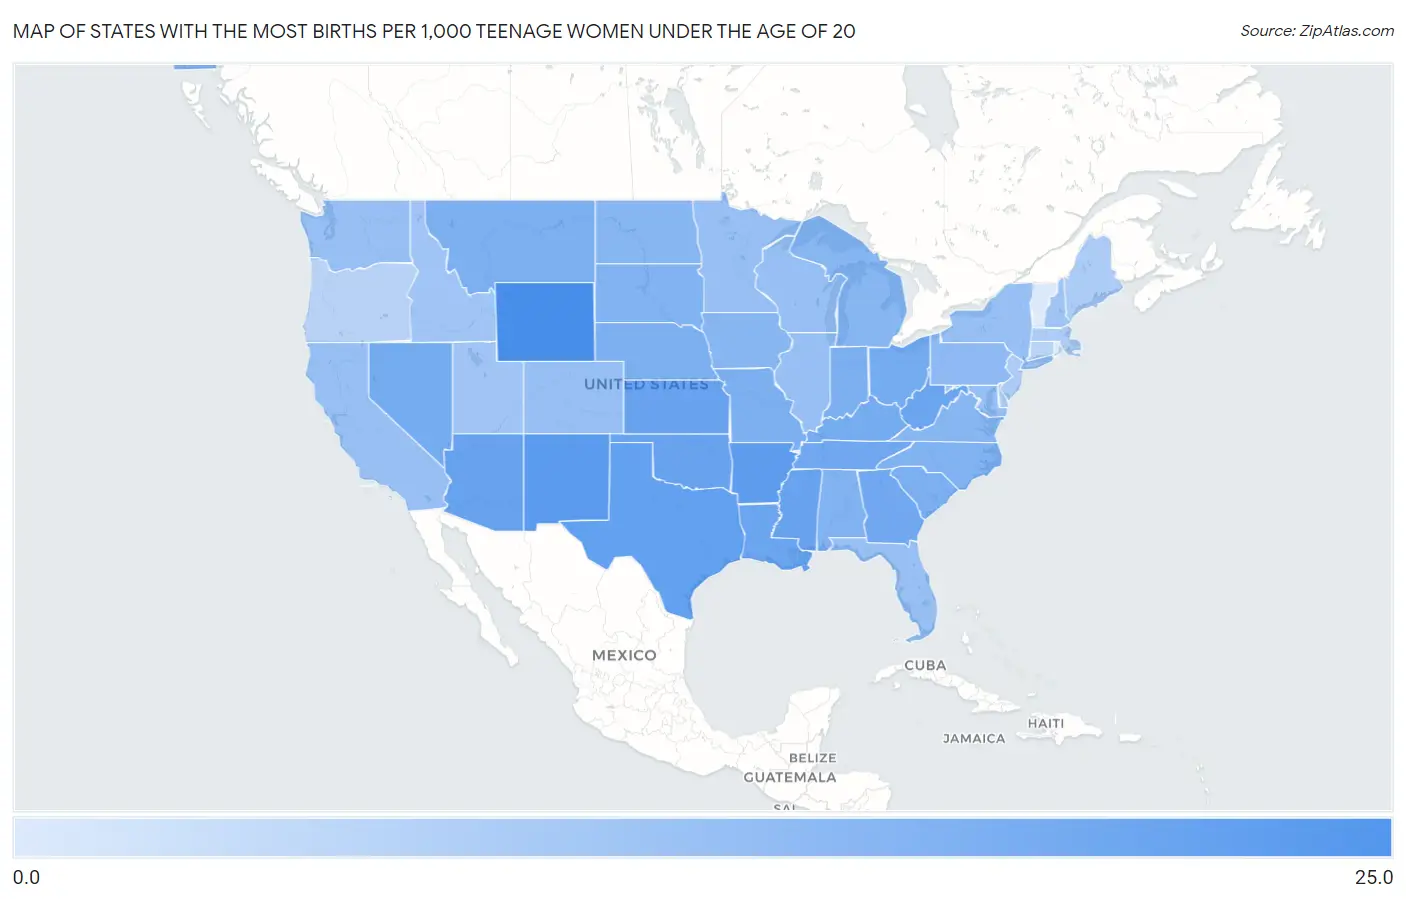 States with the Most Births per 1,000 Teenage Women Under the Age of 20 in the United States Map